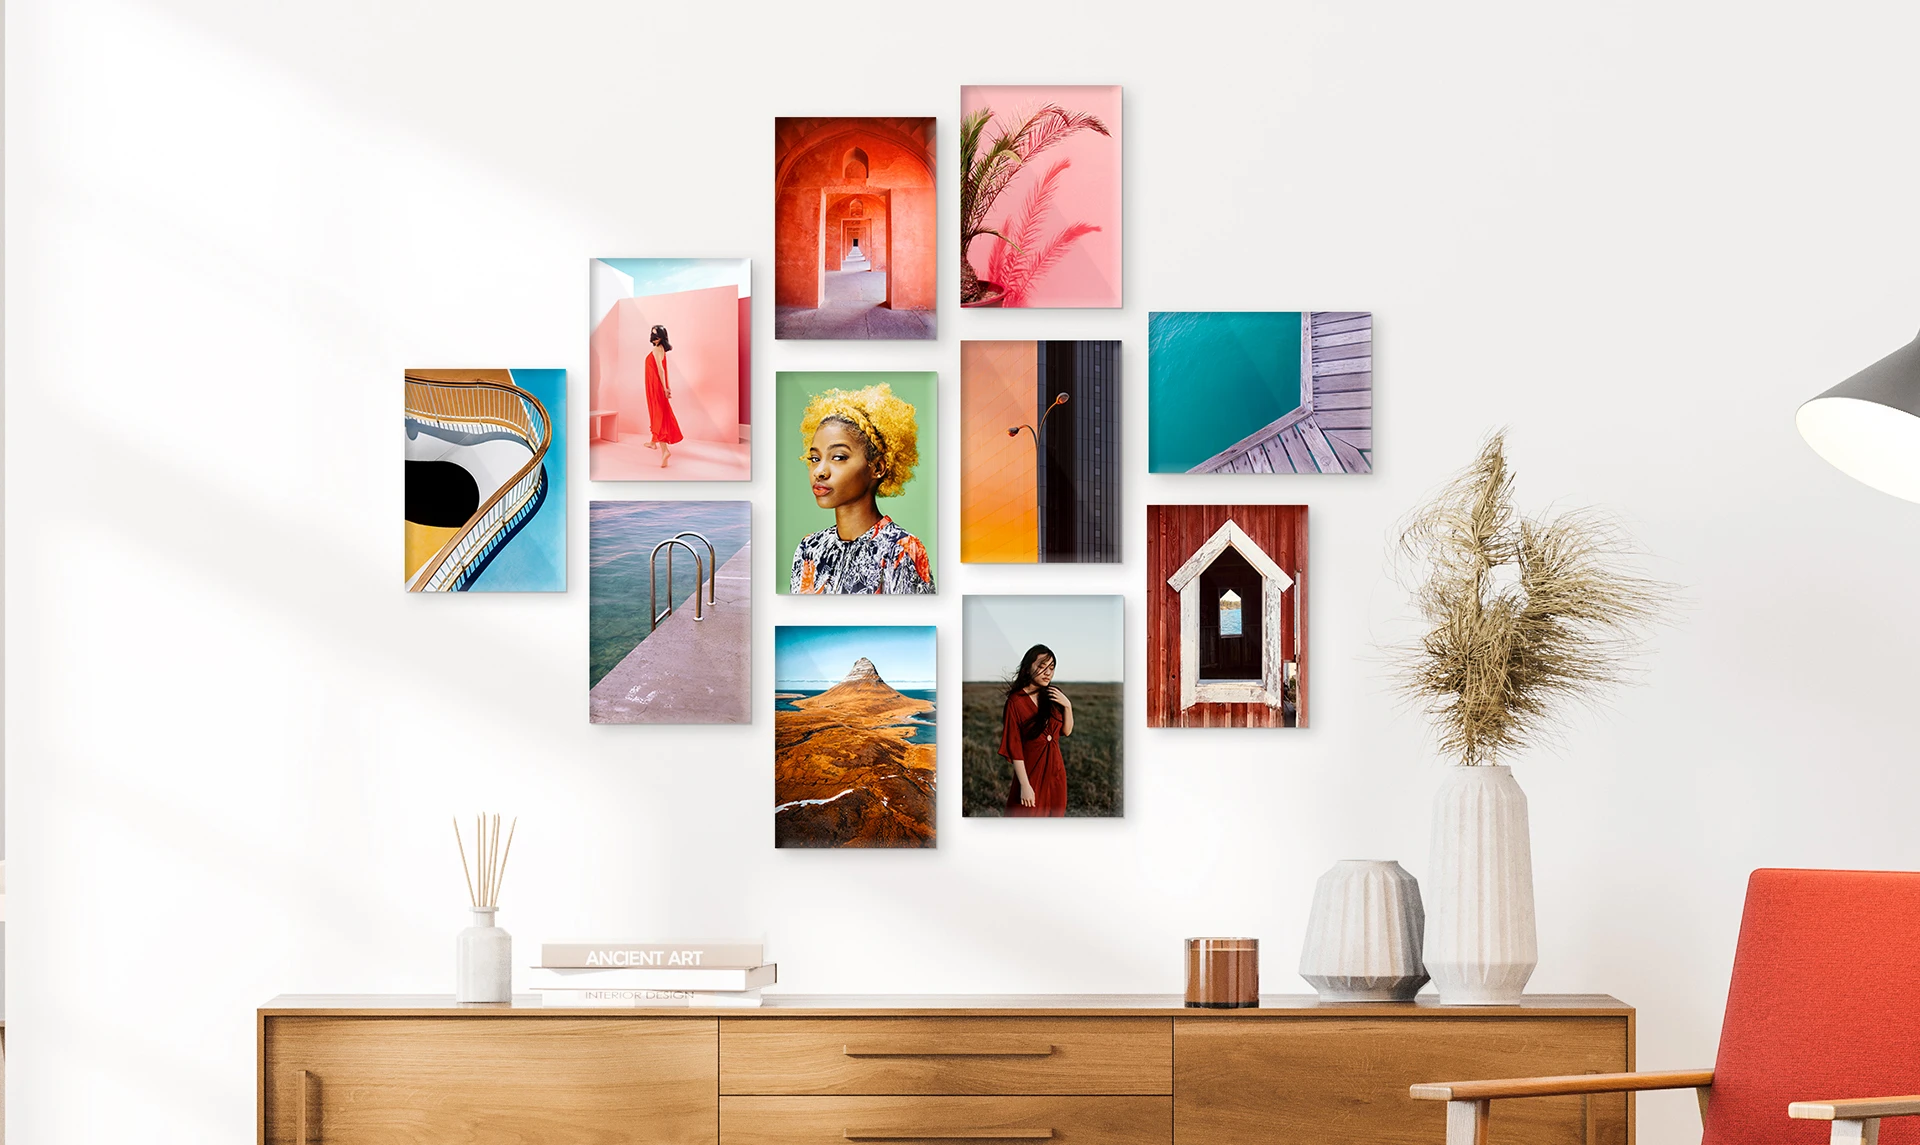 mutliple whitewall mini acrylic prints as a hanging on a wall.